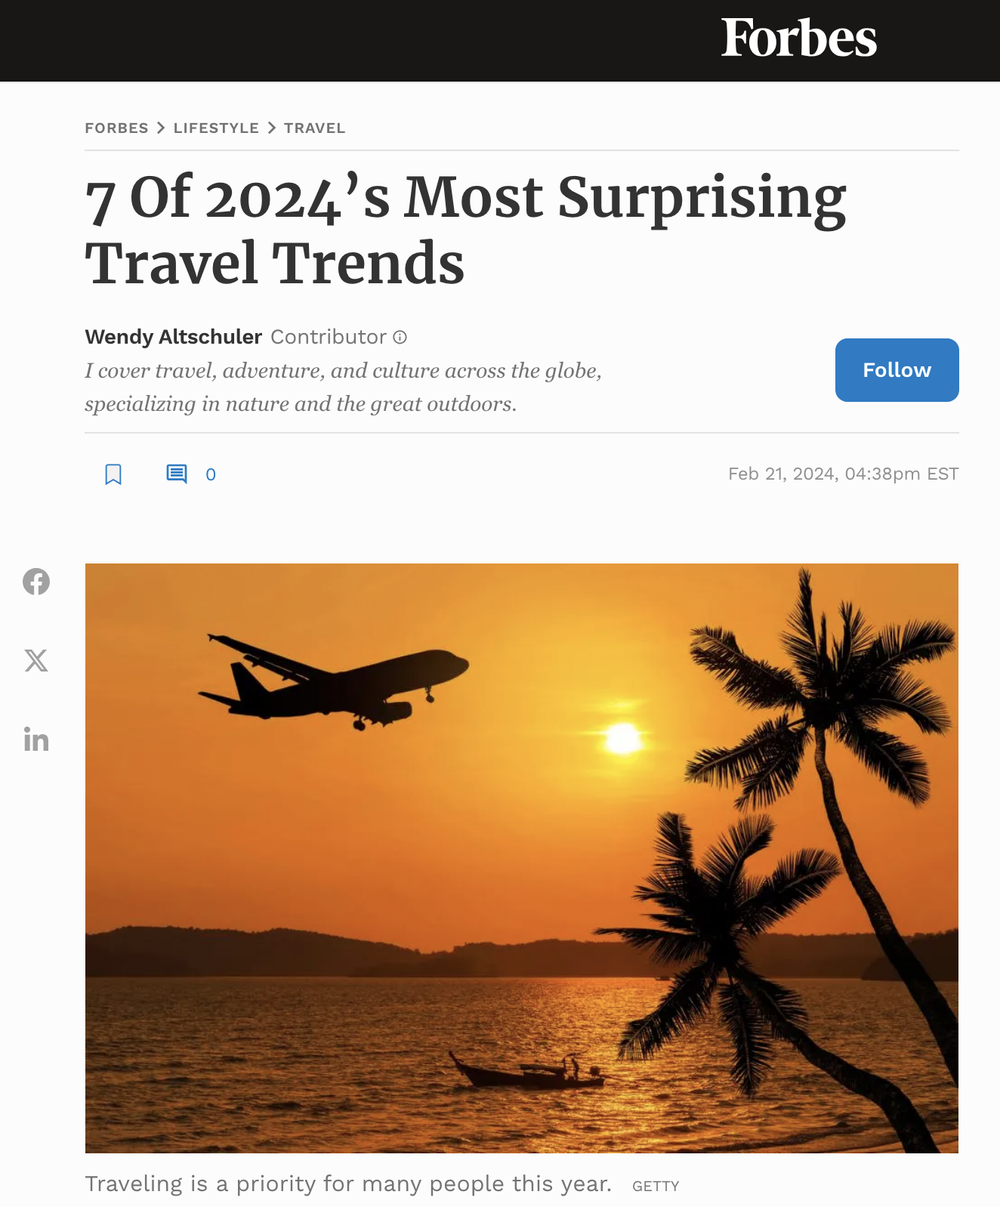 7 Of 2024’s Most Surprising Travel Trends